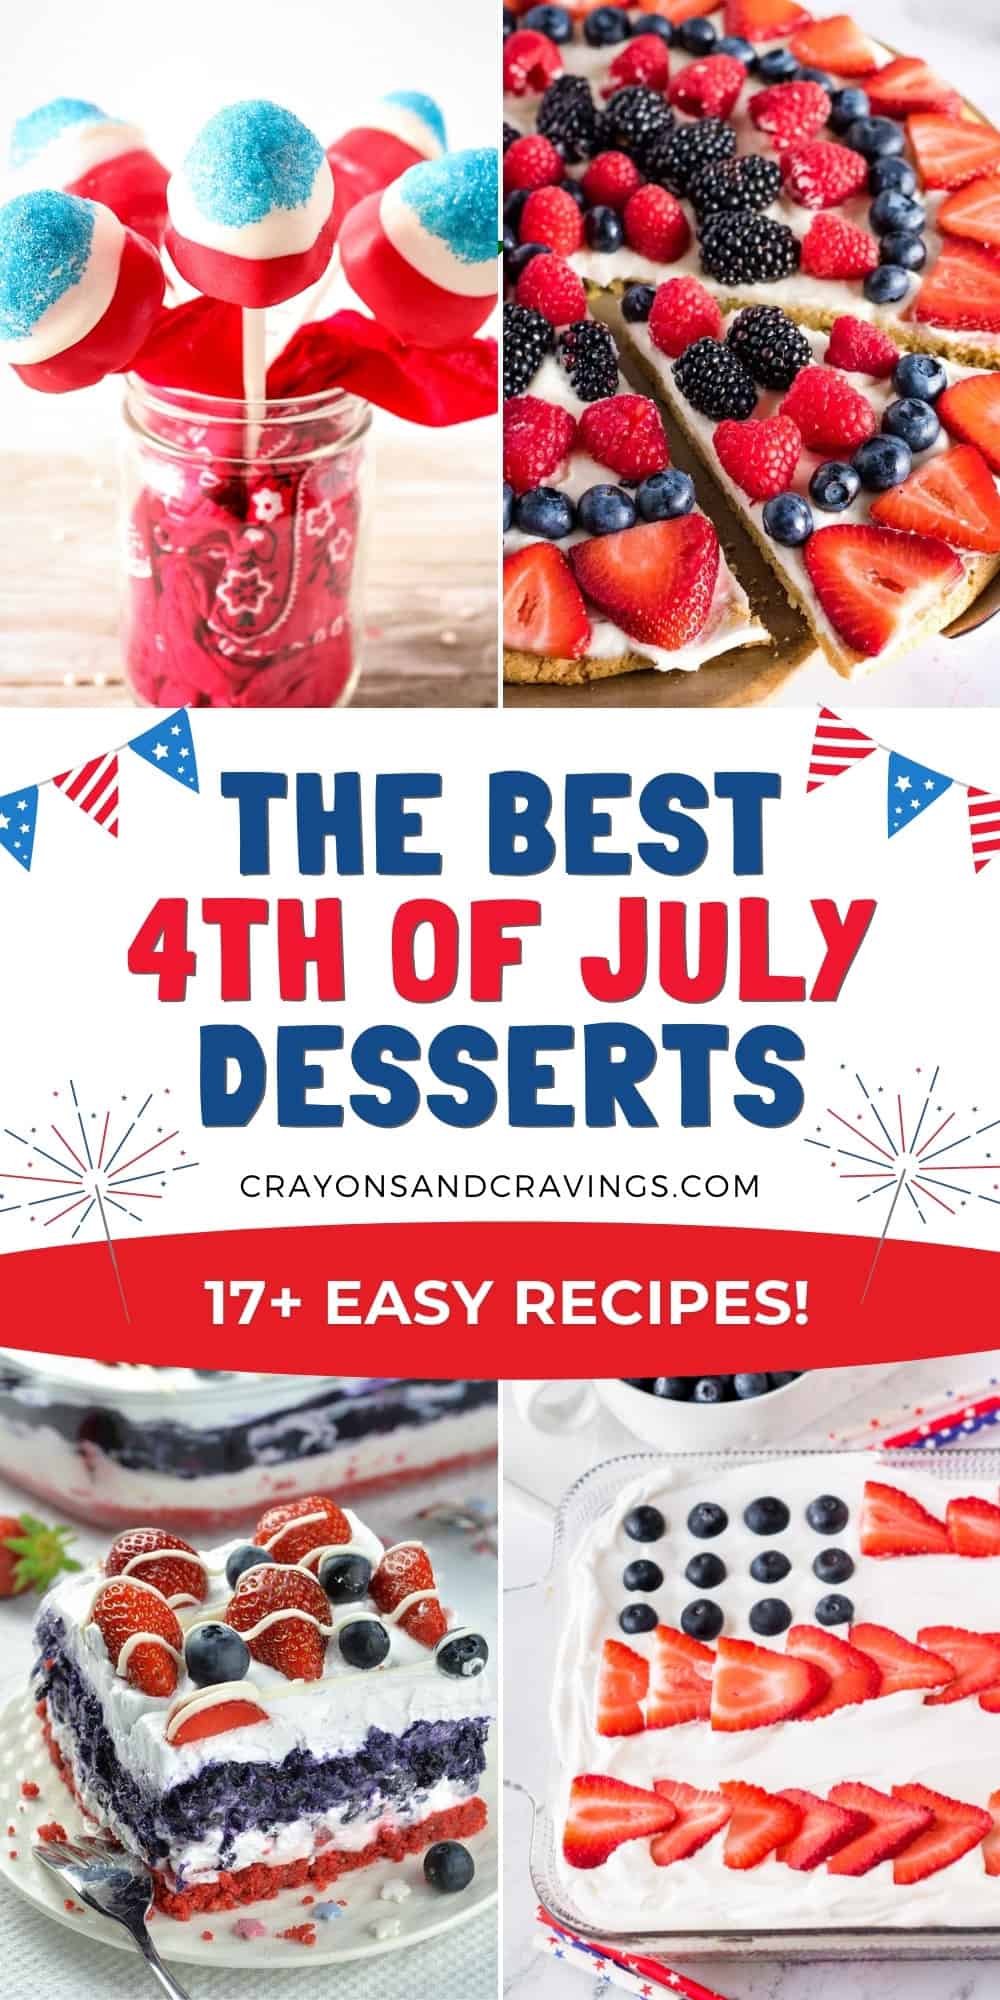 The best 4th of july desserts - 17+ easy recipes!